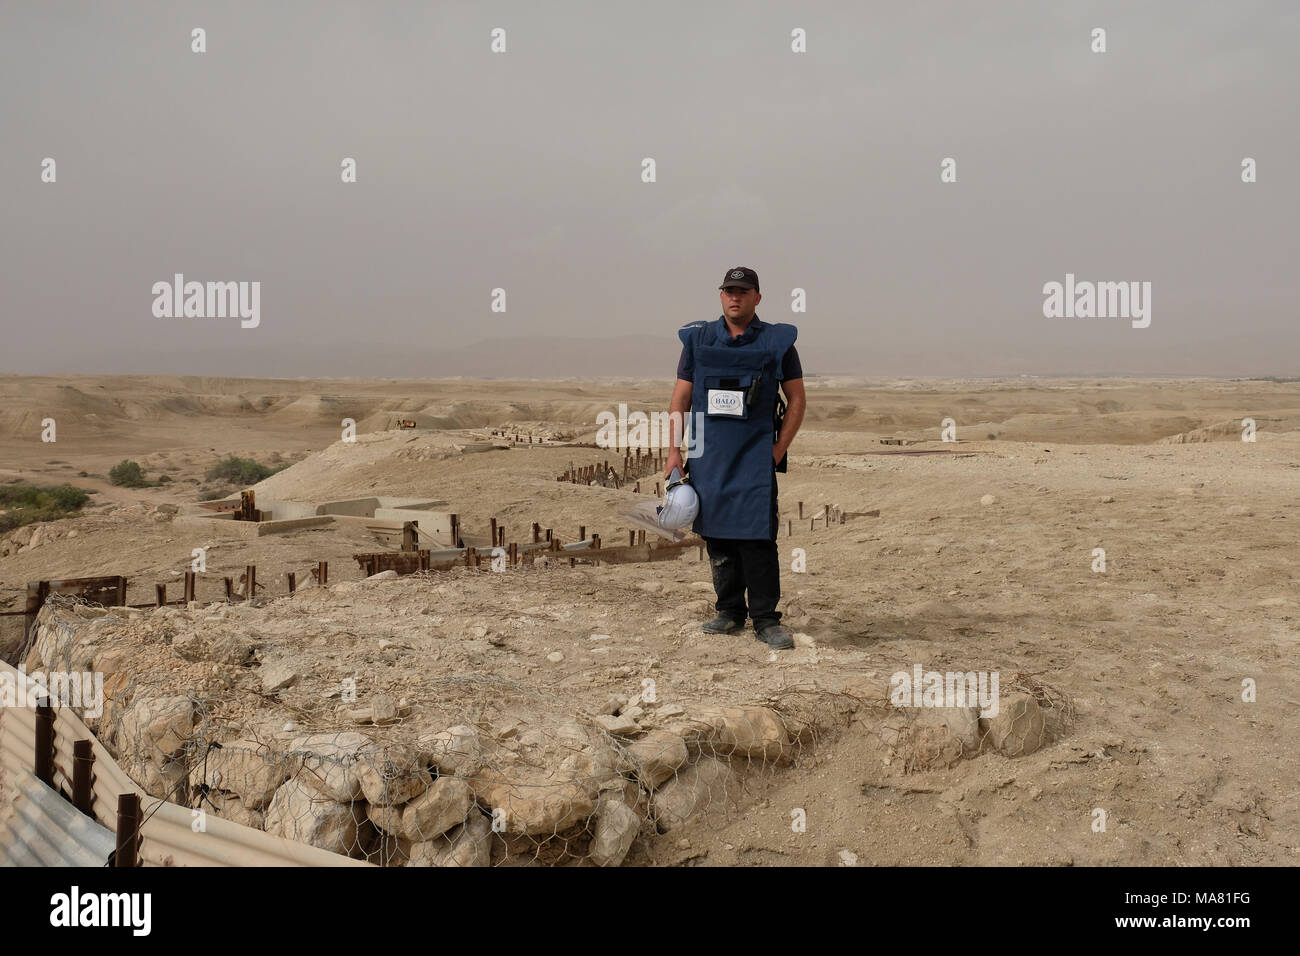 Qaser el Yahud, Israel 29th March 2018. Operations and Logistics Officer of HALO Trust group Hagai Golibrozky stands over a deserted military position in 'The land of Monasteries' area near the baptismal site Qaser el Yahud traditional site of the baptism of Jesus by John the Baptist in the Jordan River Valley region of West Bank, Israel. The area started to be cleared of some 4,000 landmines from the 1967 war and its aftermath by HALO Trust, a Scottish demining group that operates in 19 places around the world. Stock Photo